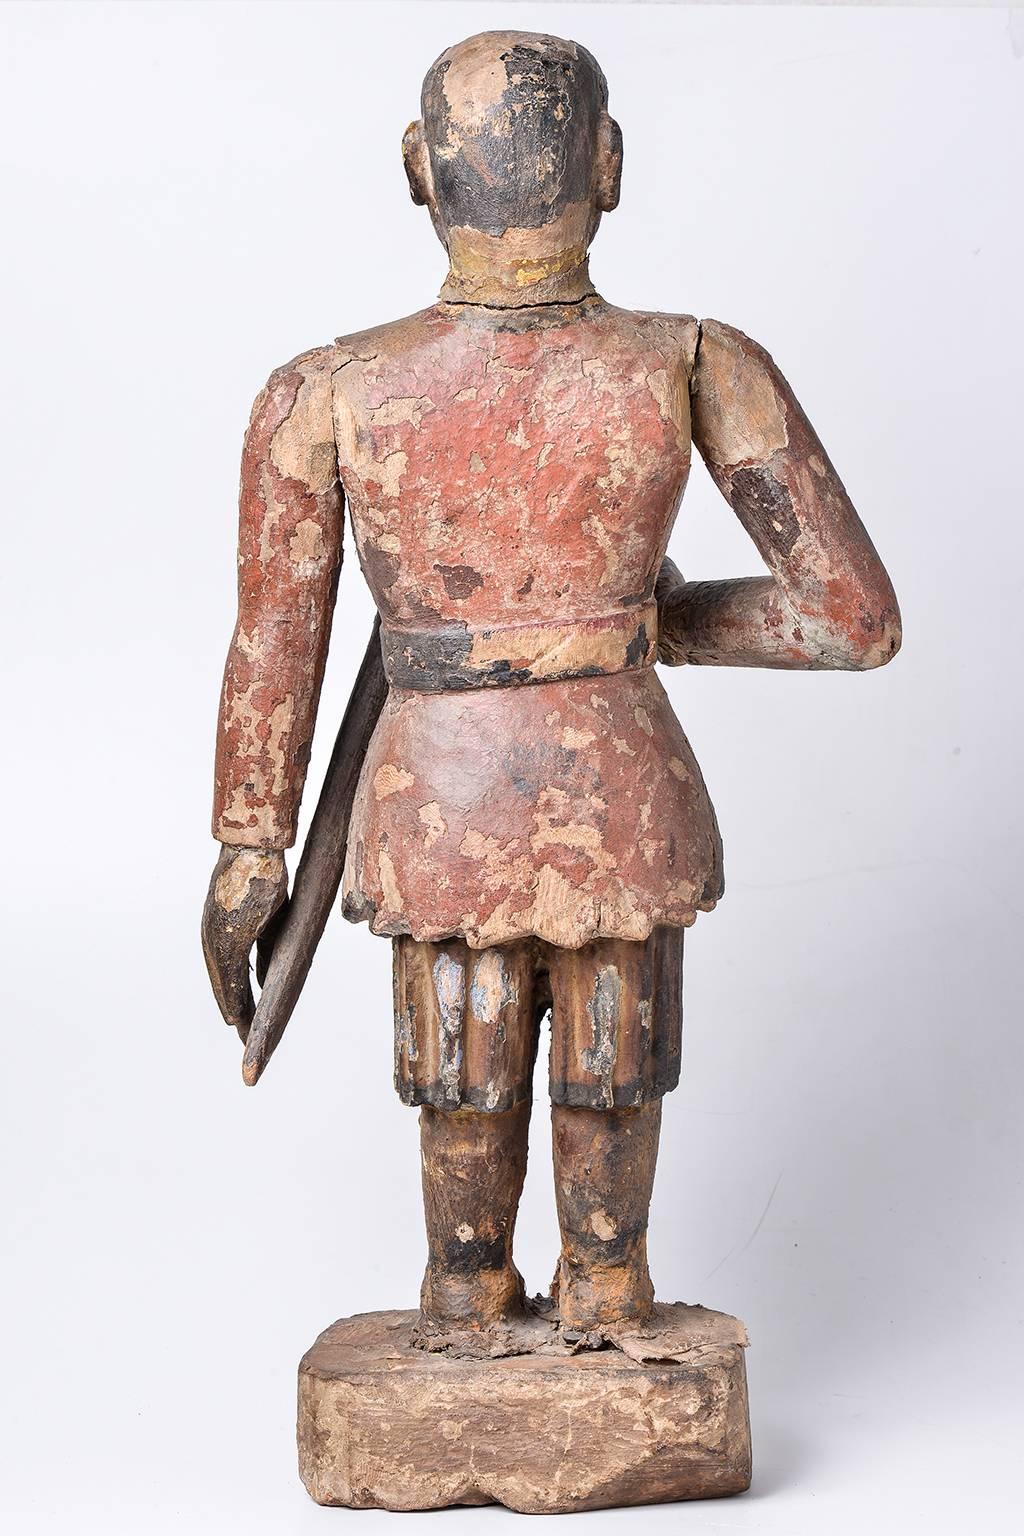 Impressive antique Indian warrior, from Gujarat. ( N. 811.)
Gujarat o Gujrat, antique town in Indian (now Pakistan) region of Punjab. It was an important strategic node and was under Mogul domain for 3 centuries. In 1765 conquered by Sikh;  in 1849